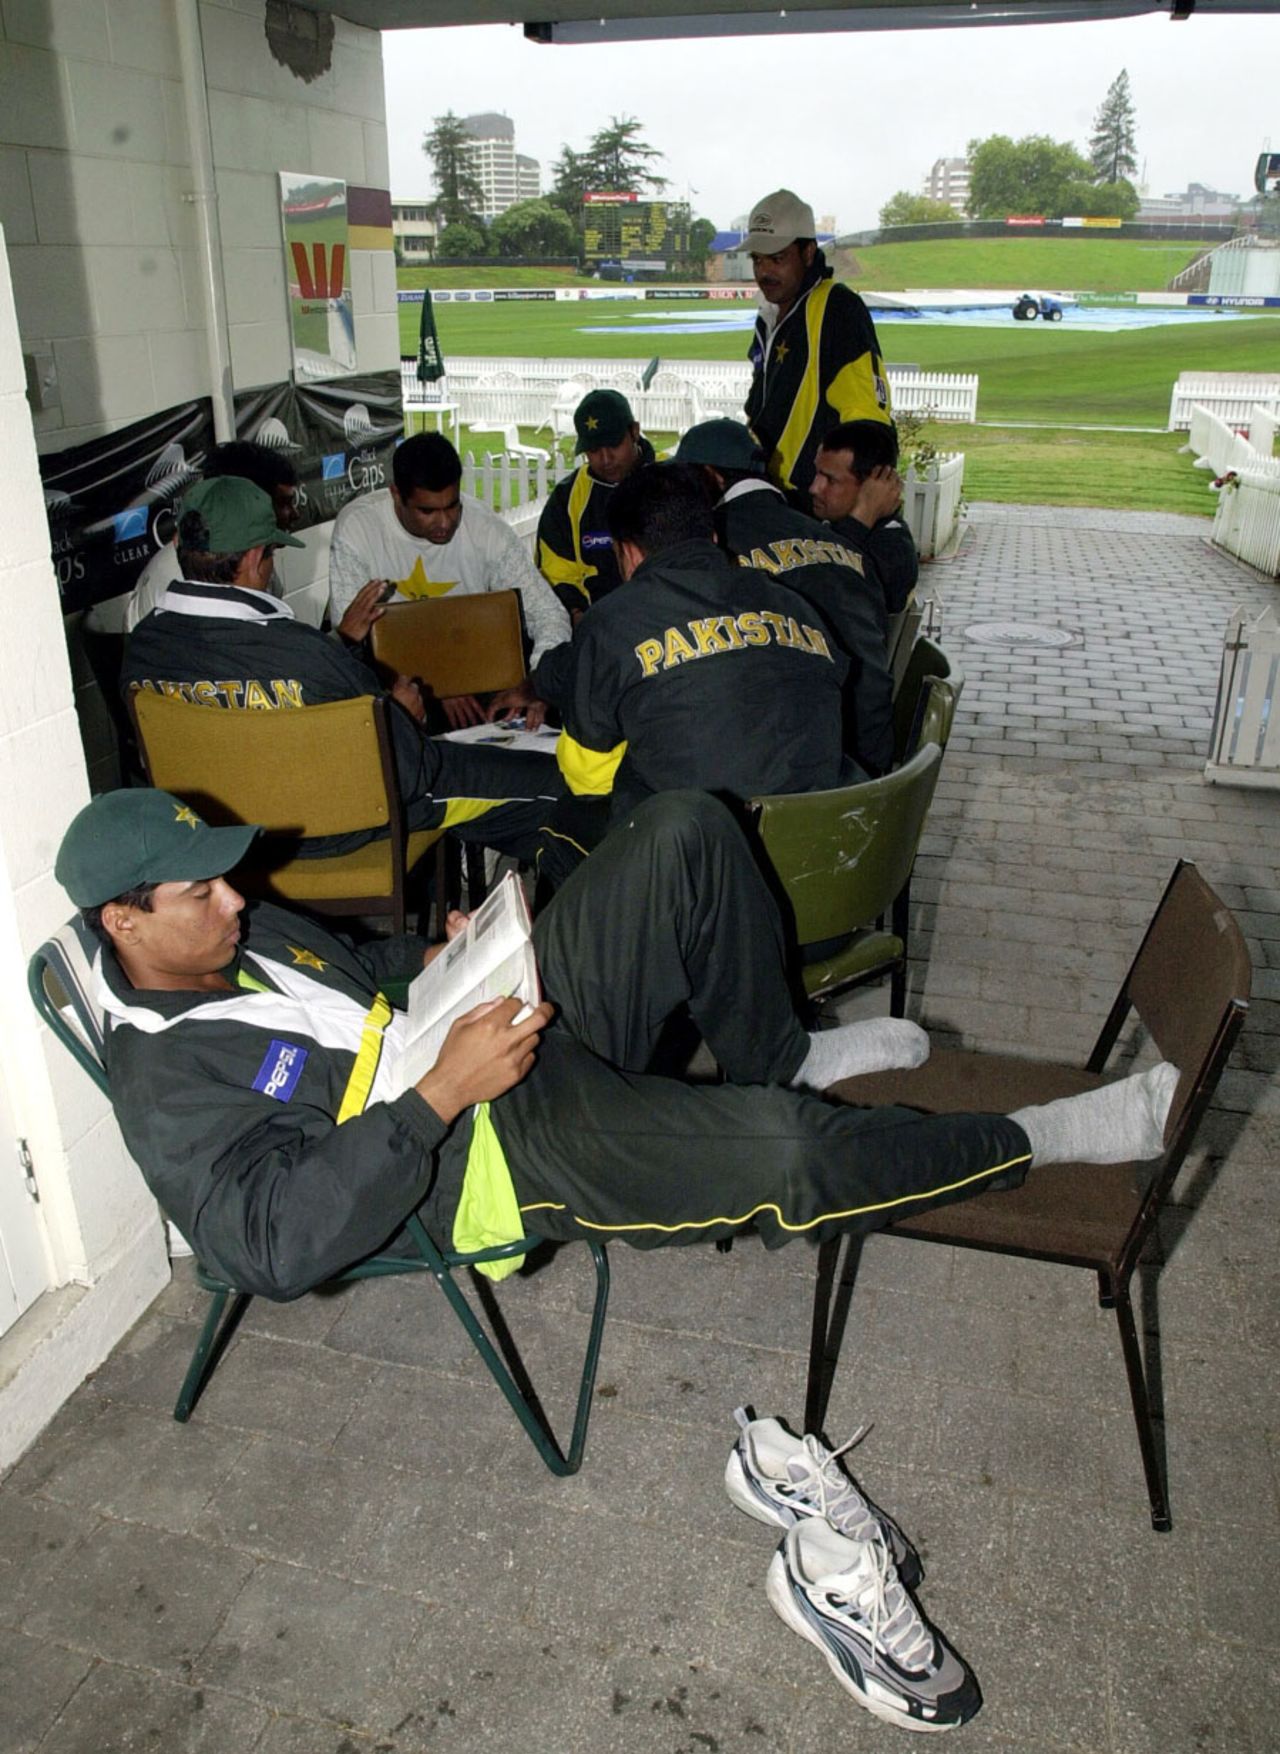 Mohammad Sami reads a book while his team-mates play cards during a rain delay, New Zealand v Pakistan, 3rd Test, Hamilton, 2nd day, March 28, 2001